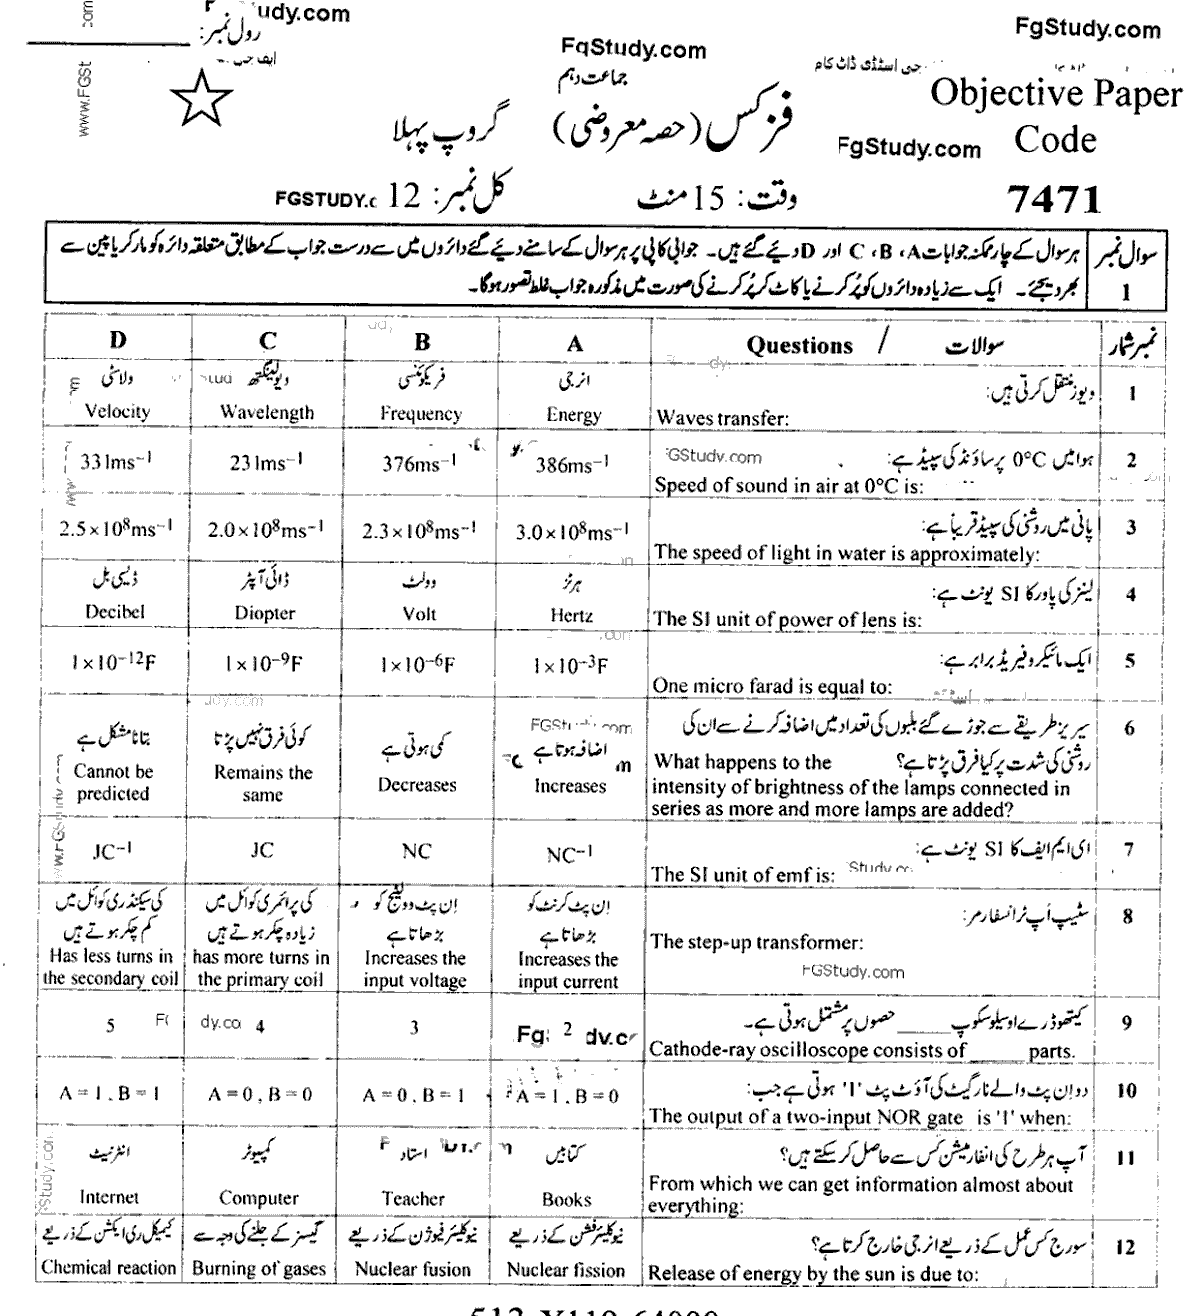 Physics Group 1 Objective 10th Class Past Papers 2019